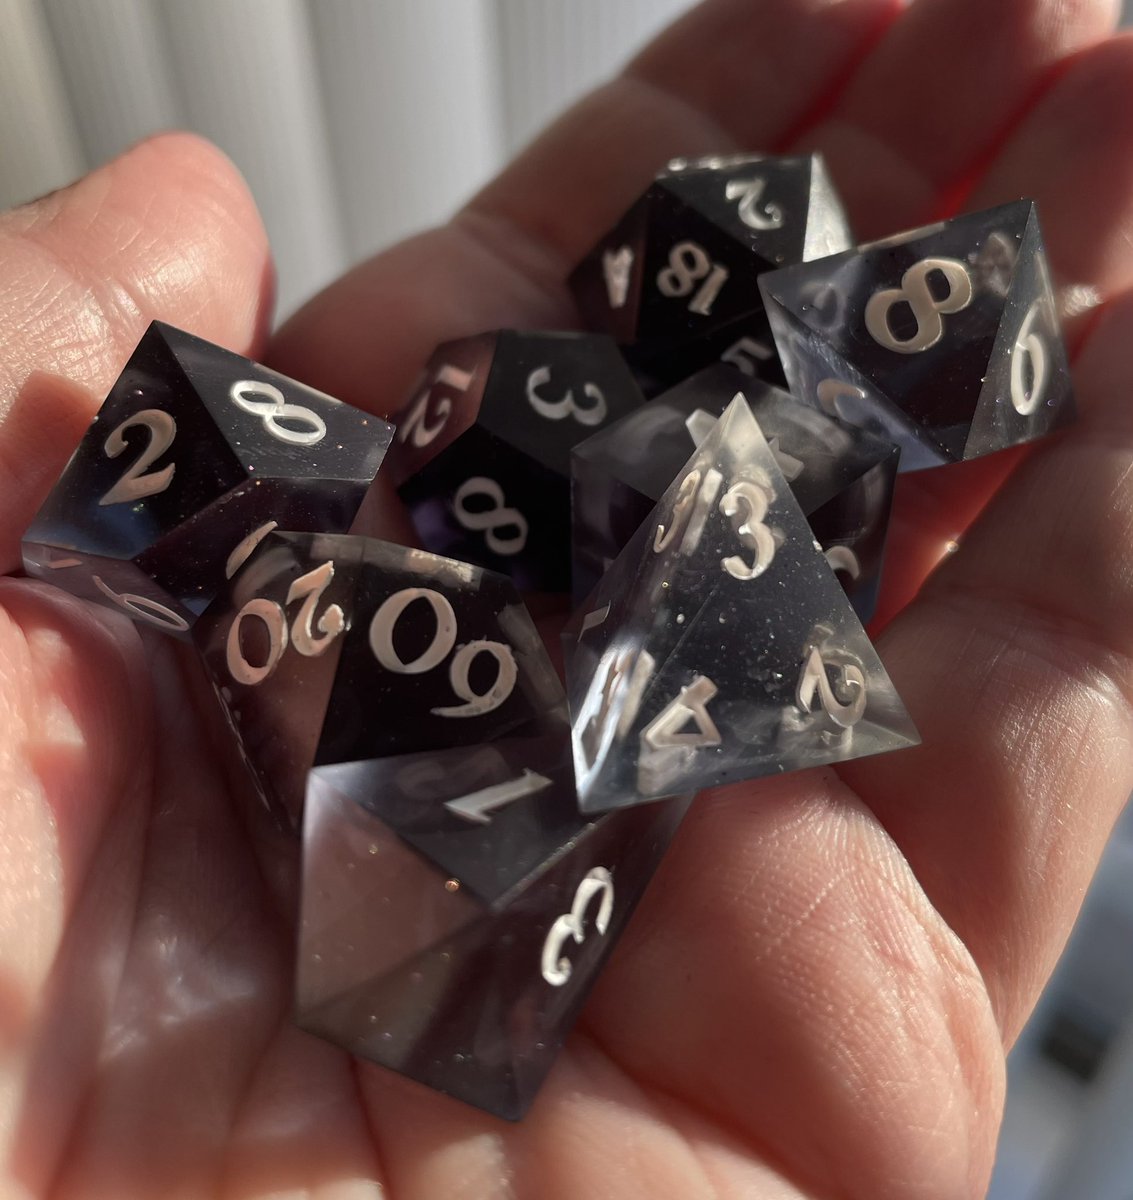 These beautiful Translucent Onyx Dice Set available on my Etsy shop!
FoxGamingau.Etsy.com
#dice #dicemaking #dnd #dnd5e #dungeonsanddragons #rpg #ttrpg #roleplaygame #epoxyresin #homemade #handmade #handmadedice #tabletop #tabletopgames #pathfinder #etsy #cosmos #black